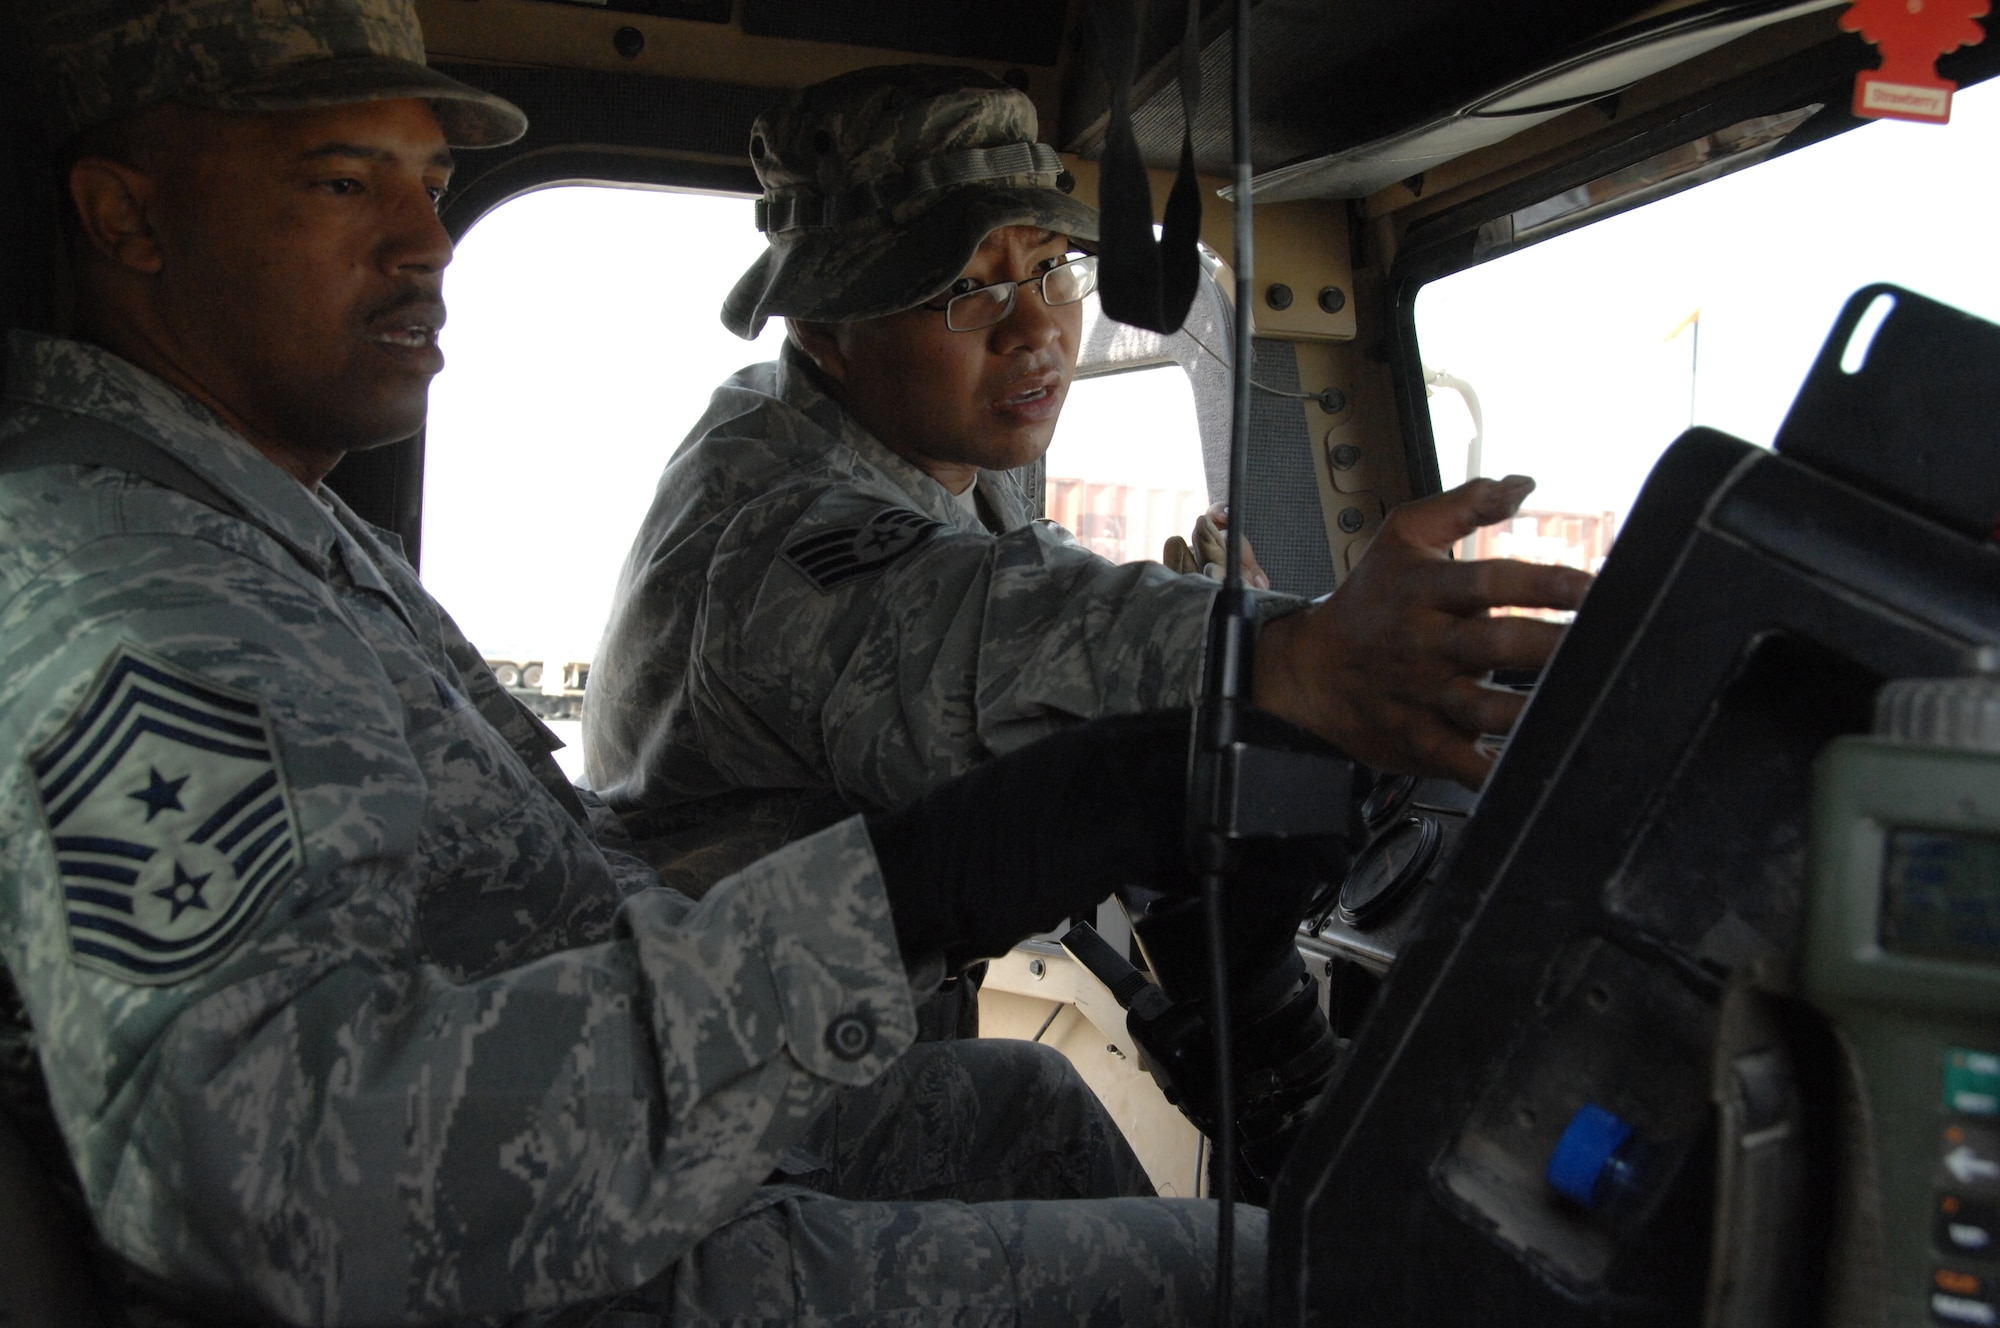 SOUTHWEST ASIA -- Staff Sergeant Alvin Santos, 70th Military Truck Detachment, explains different line haul truck operating controls to 386th Air Expeditionary Wing Command Chief Master Sergeant Jeffrey Antwine at an Army base in Southwest Asia, Jan. 11. All truck operators must complete refresher training before participating in a real-world convoy. (U.S. Air Force photo/Senior Airman Courtney Richardson)